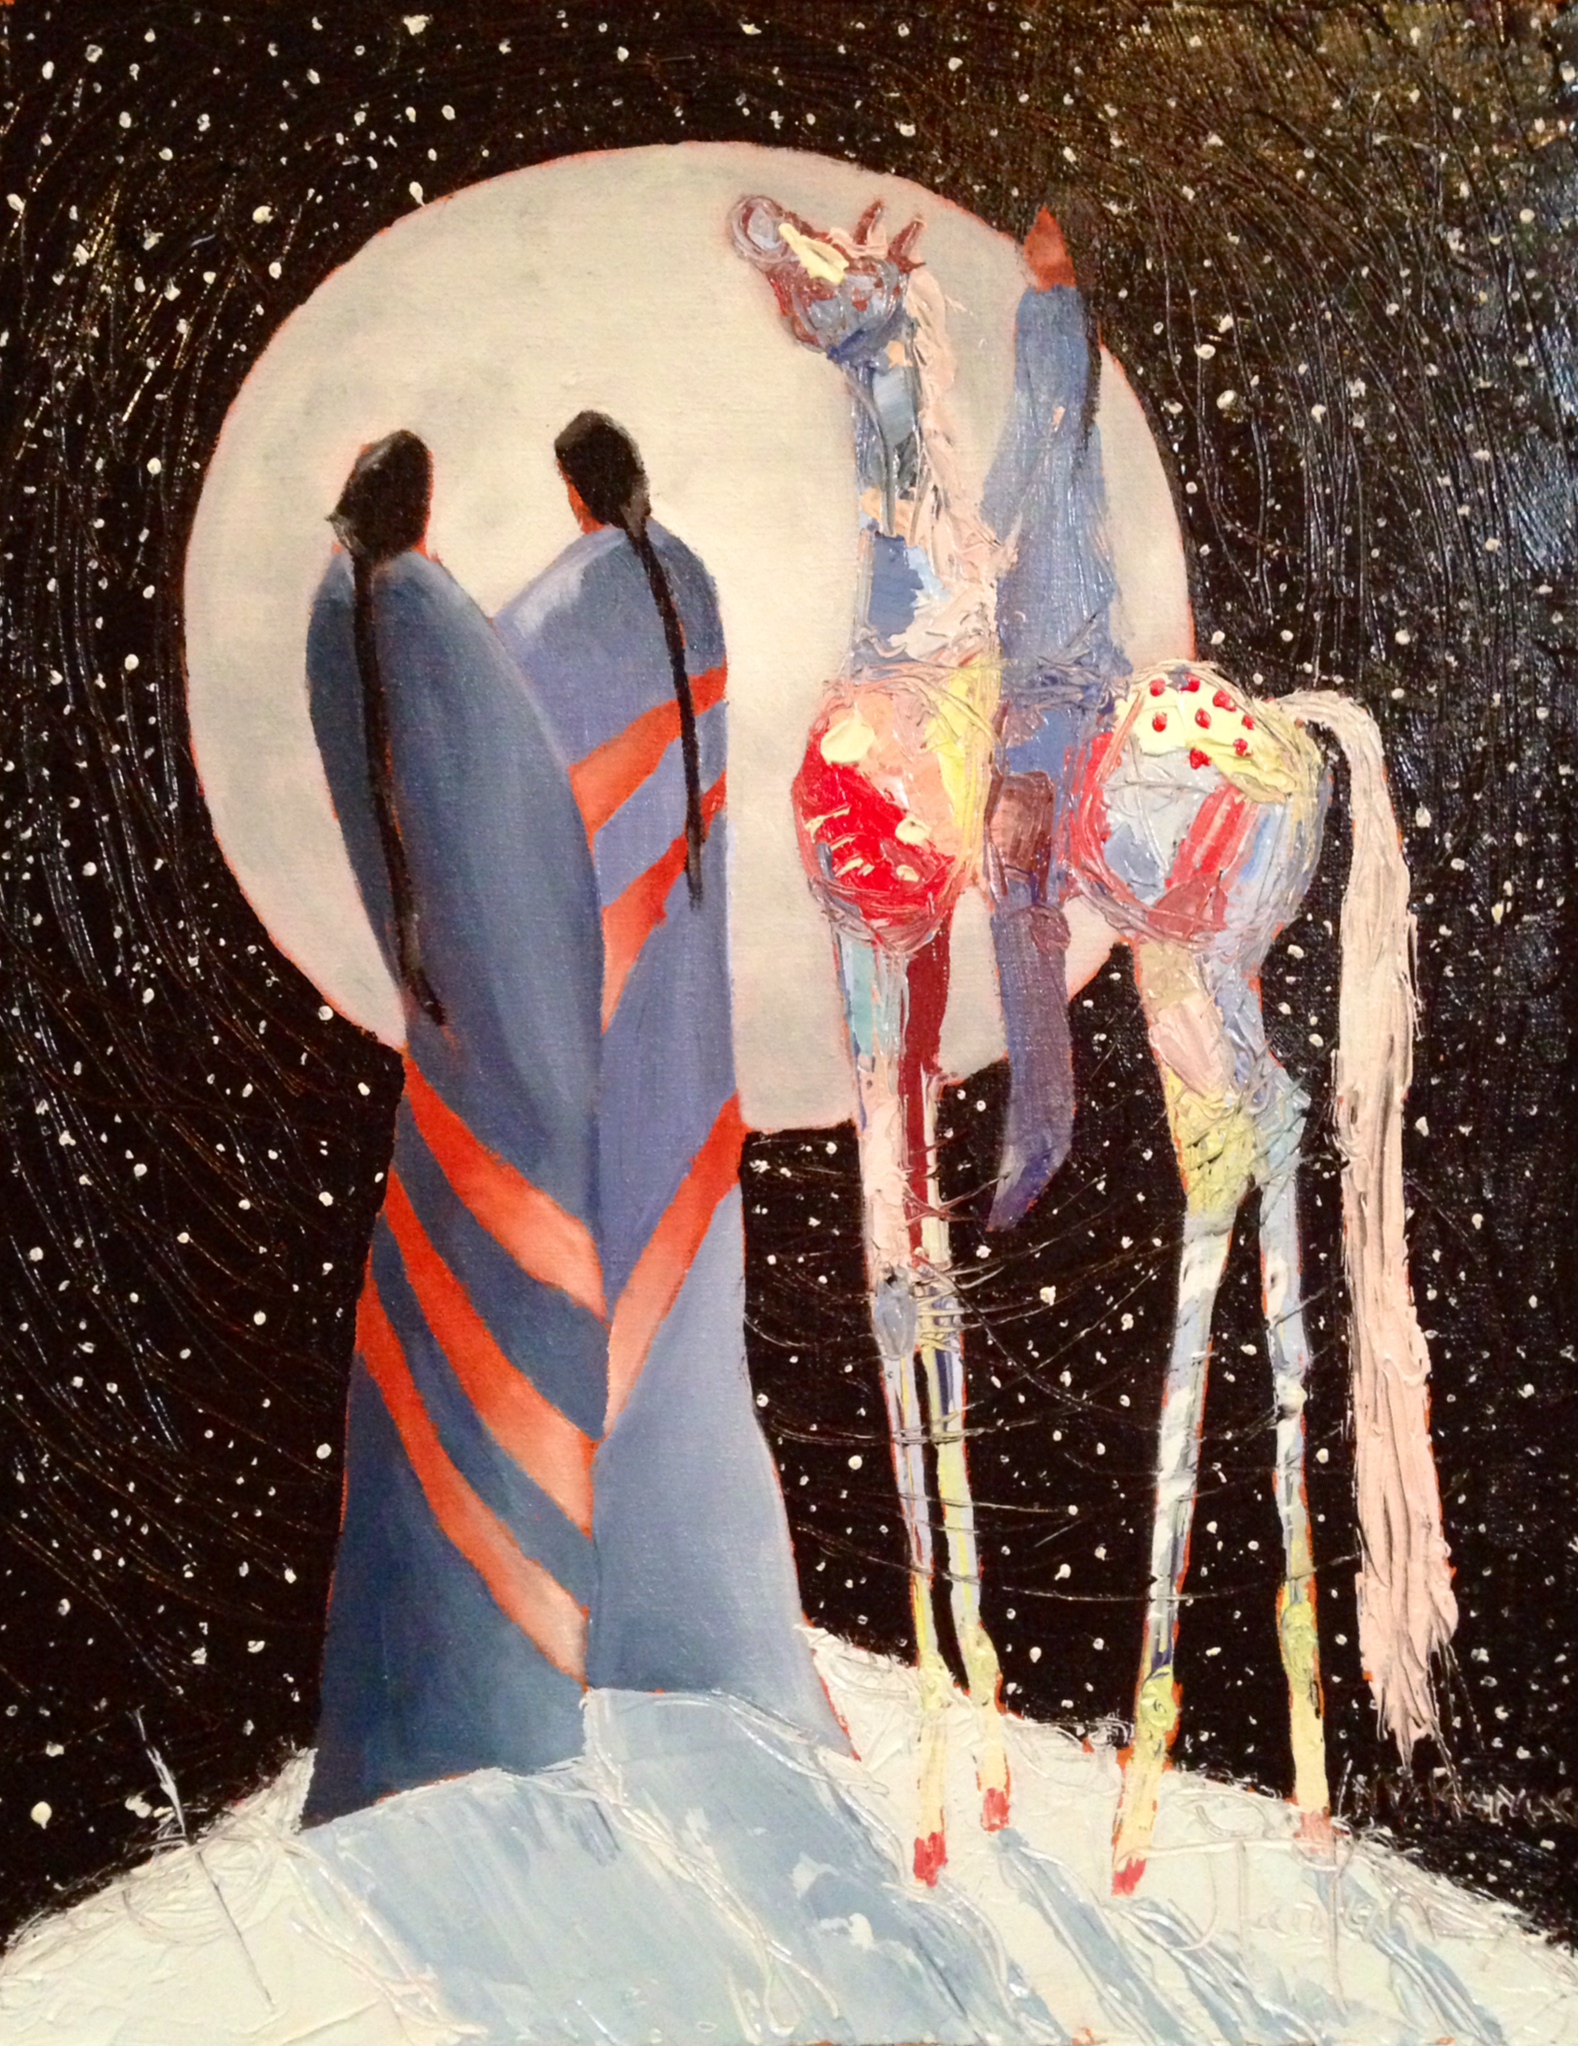 "Once In A Blue Moon" ©2014 Janice Tanton. Oil on Linen, Framed. ($1025). 11"x14" Available at Canada House Gallery, Banff, AB.